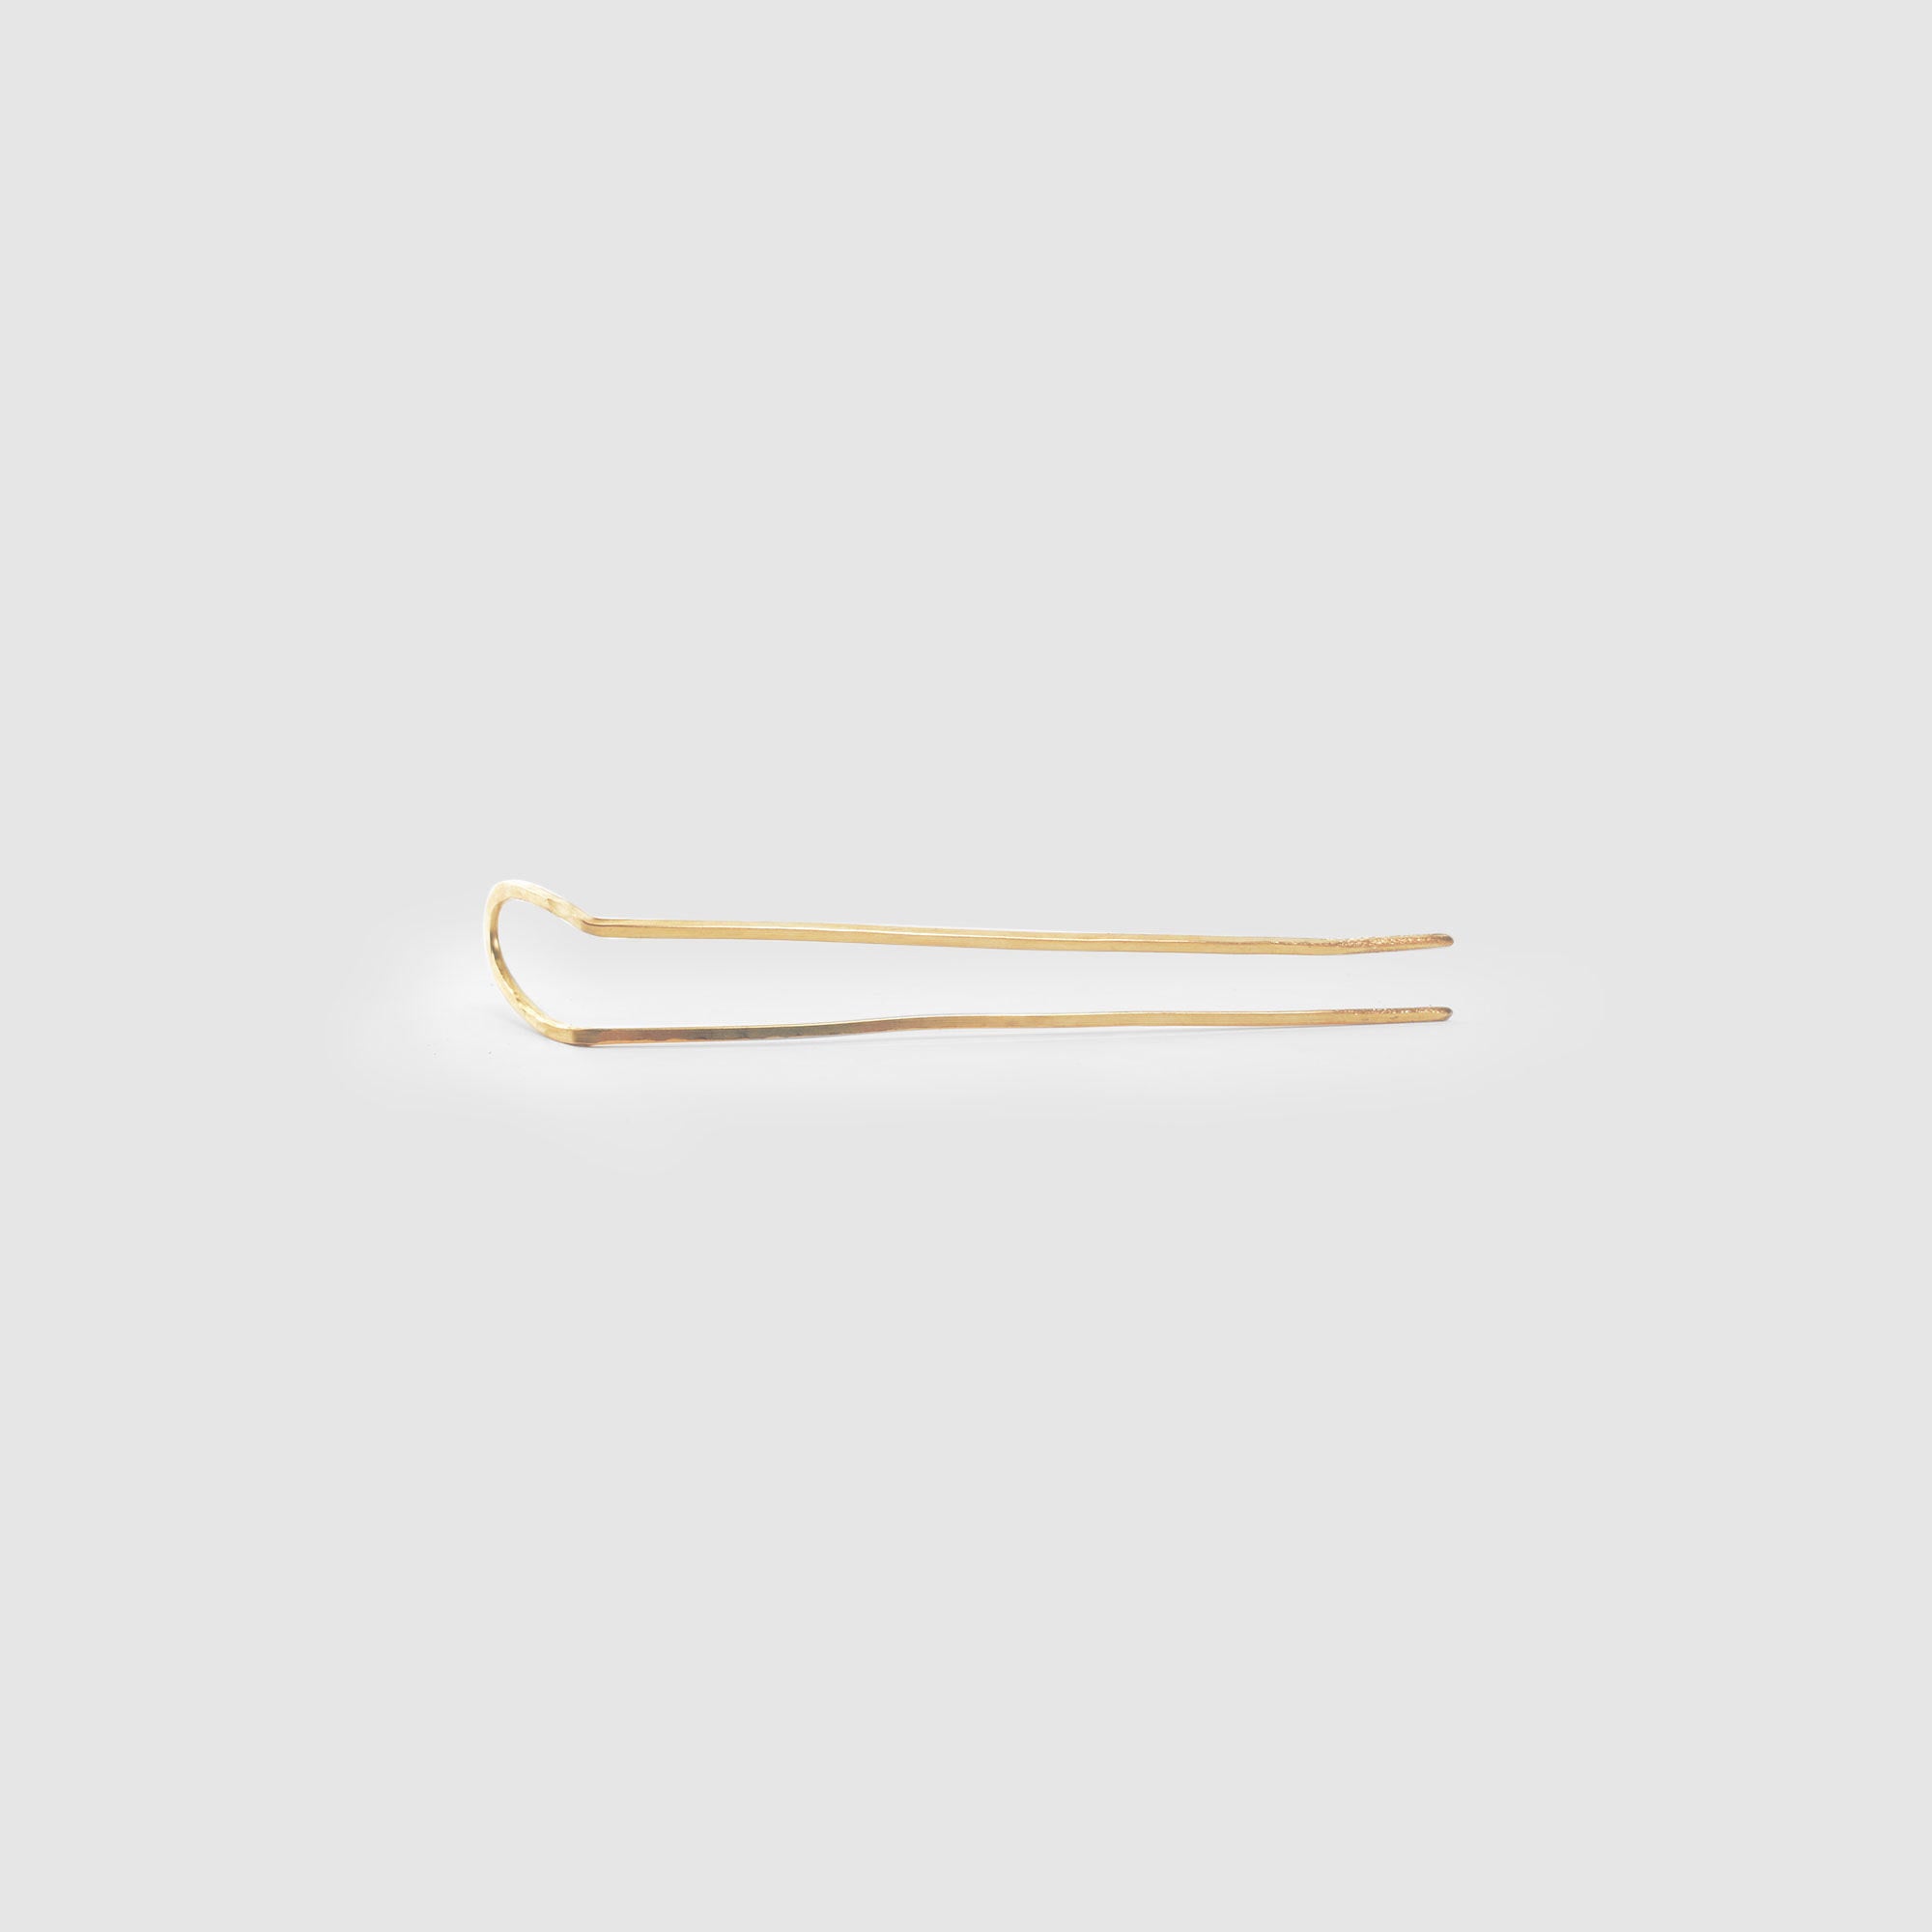 ARCO HAND HAMMERED BRASS HAIR PIN